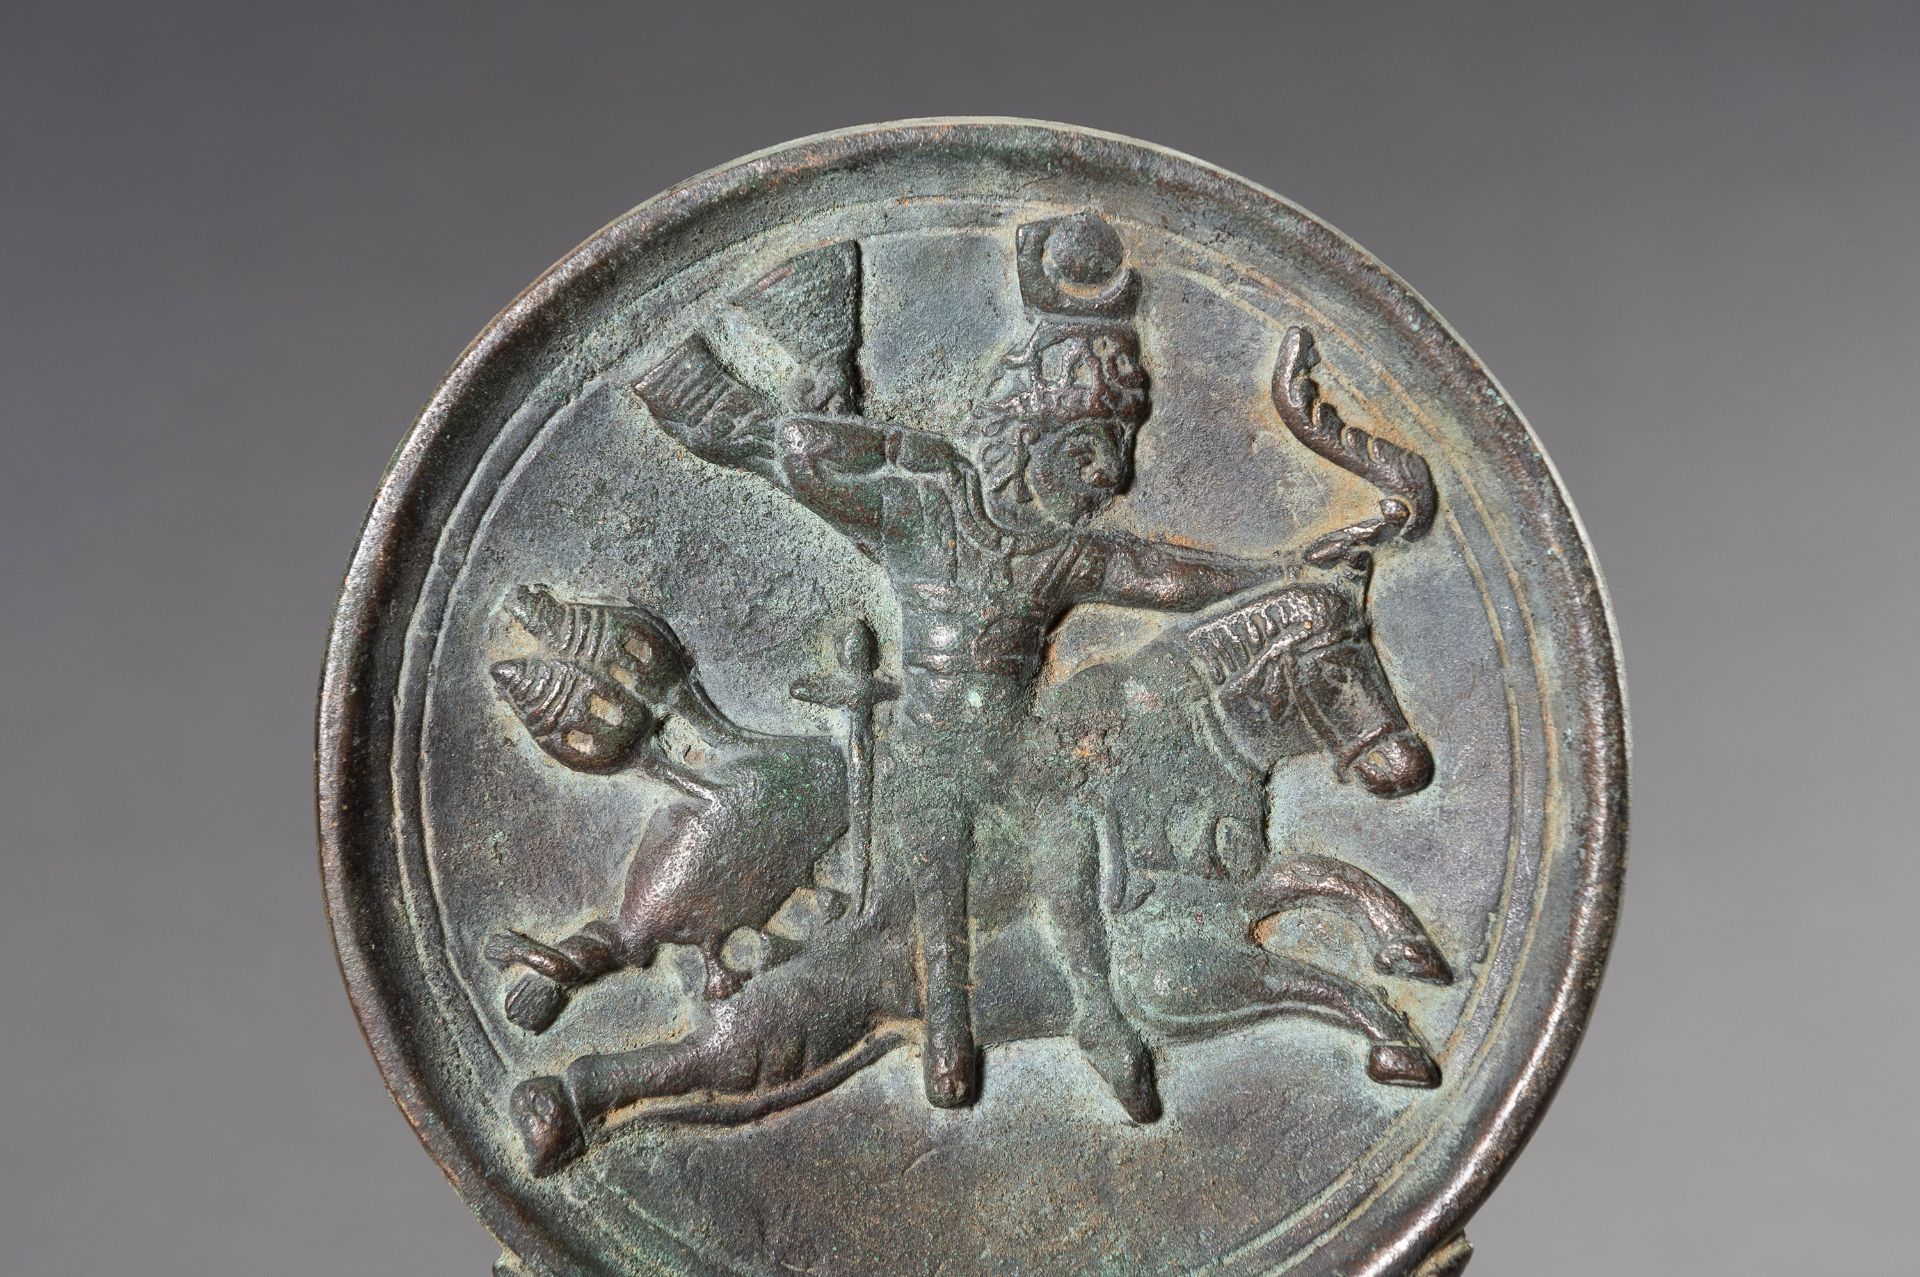 A MASSIVE GANDHARA STYLE BRONZE MIRROR WITH A FIGURAL SCENE - Image 2 of 9